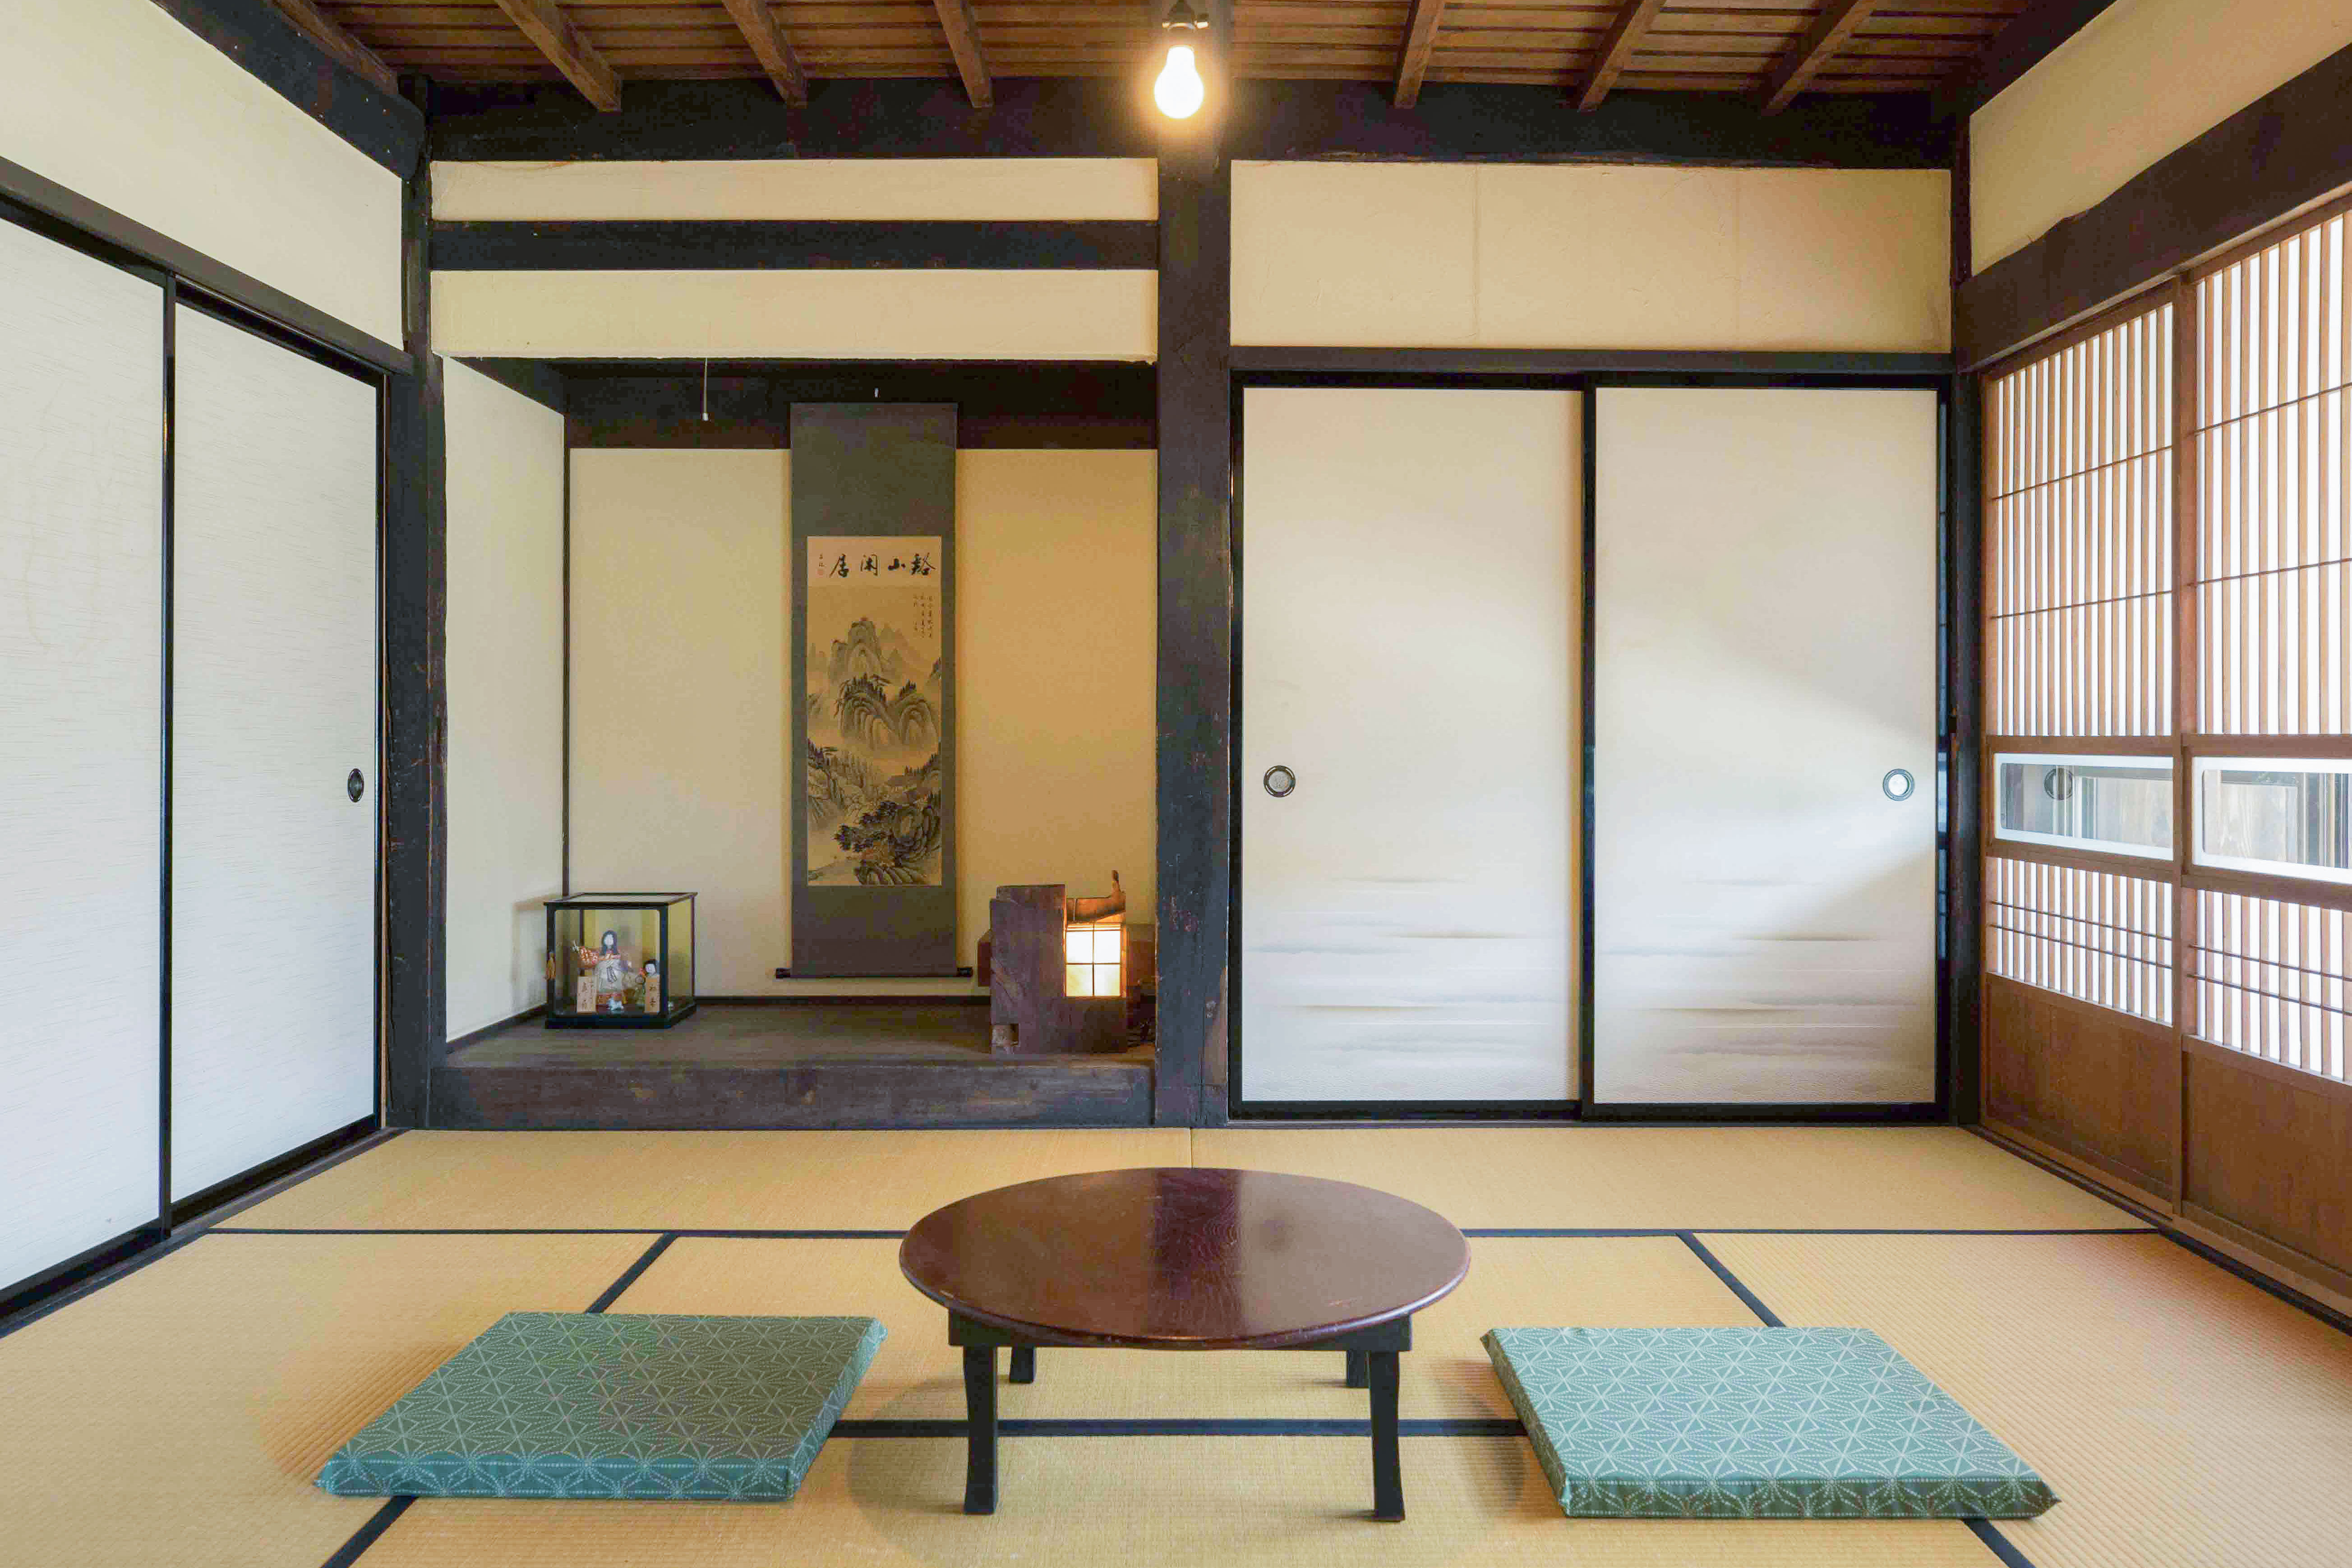 Japanese style room with two cushions and a low, round table, leading to a wooden hallway lightly decorated.